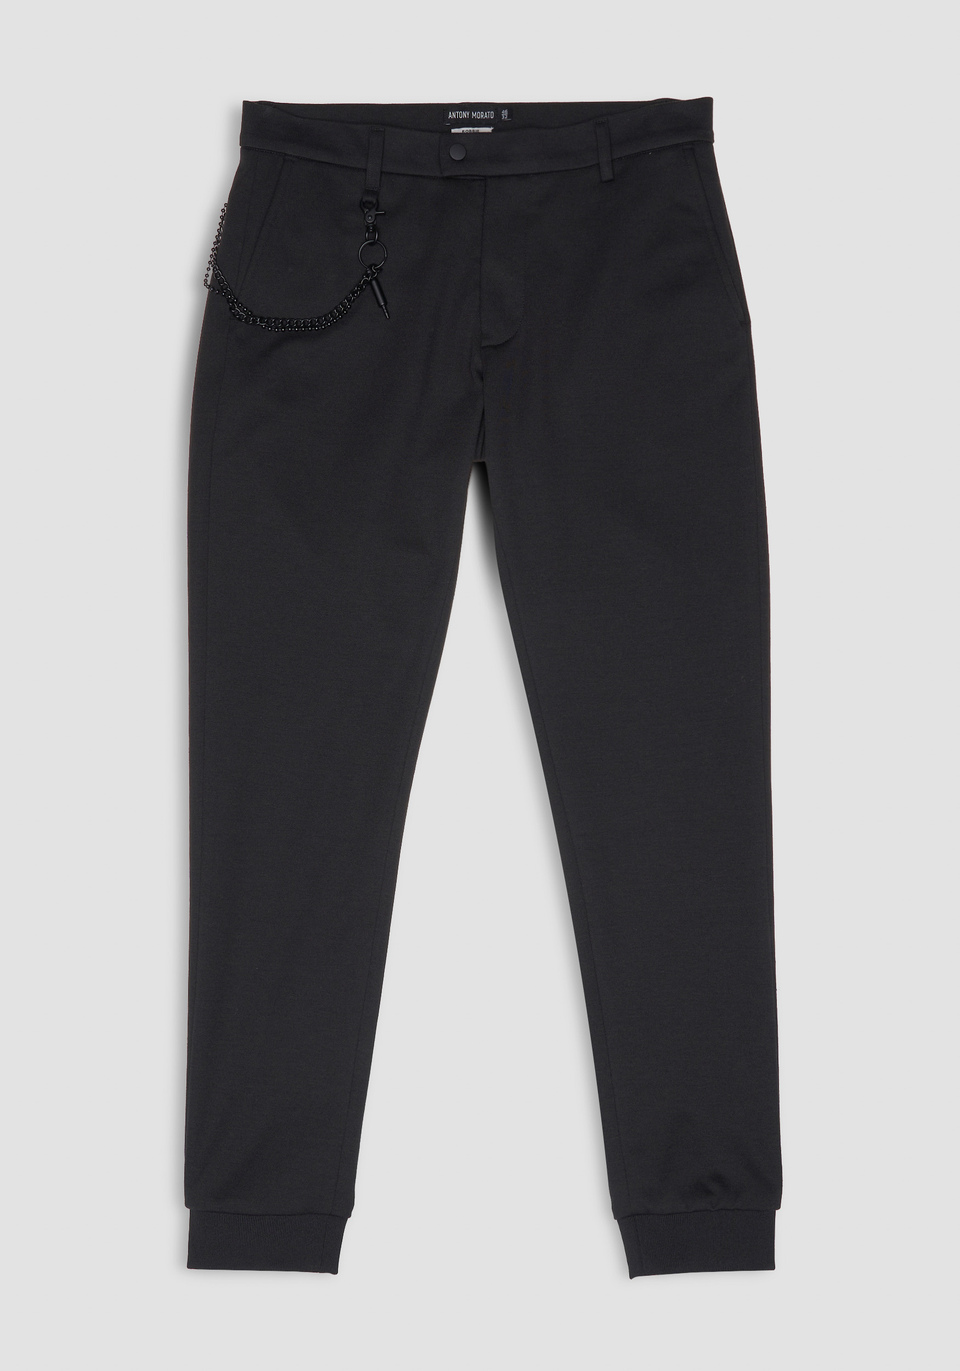 “ROBBIE” SKINNY FIT TROUSERS IN COTTON BLEND - Antony Morato Online Shop